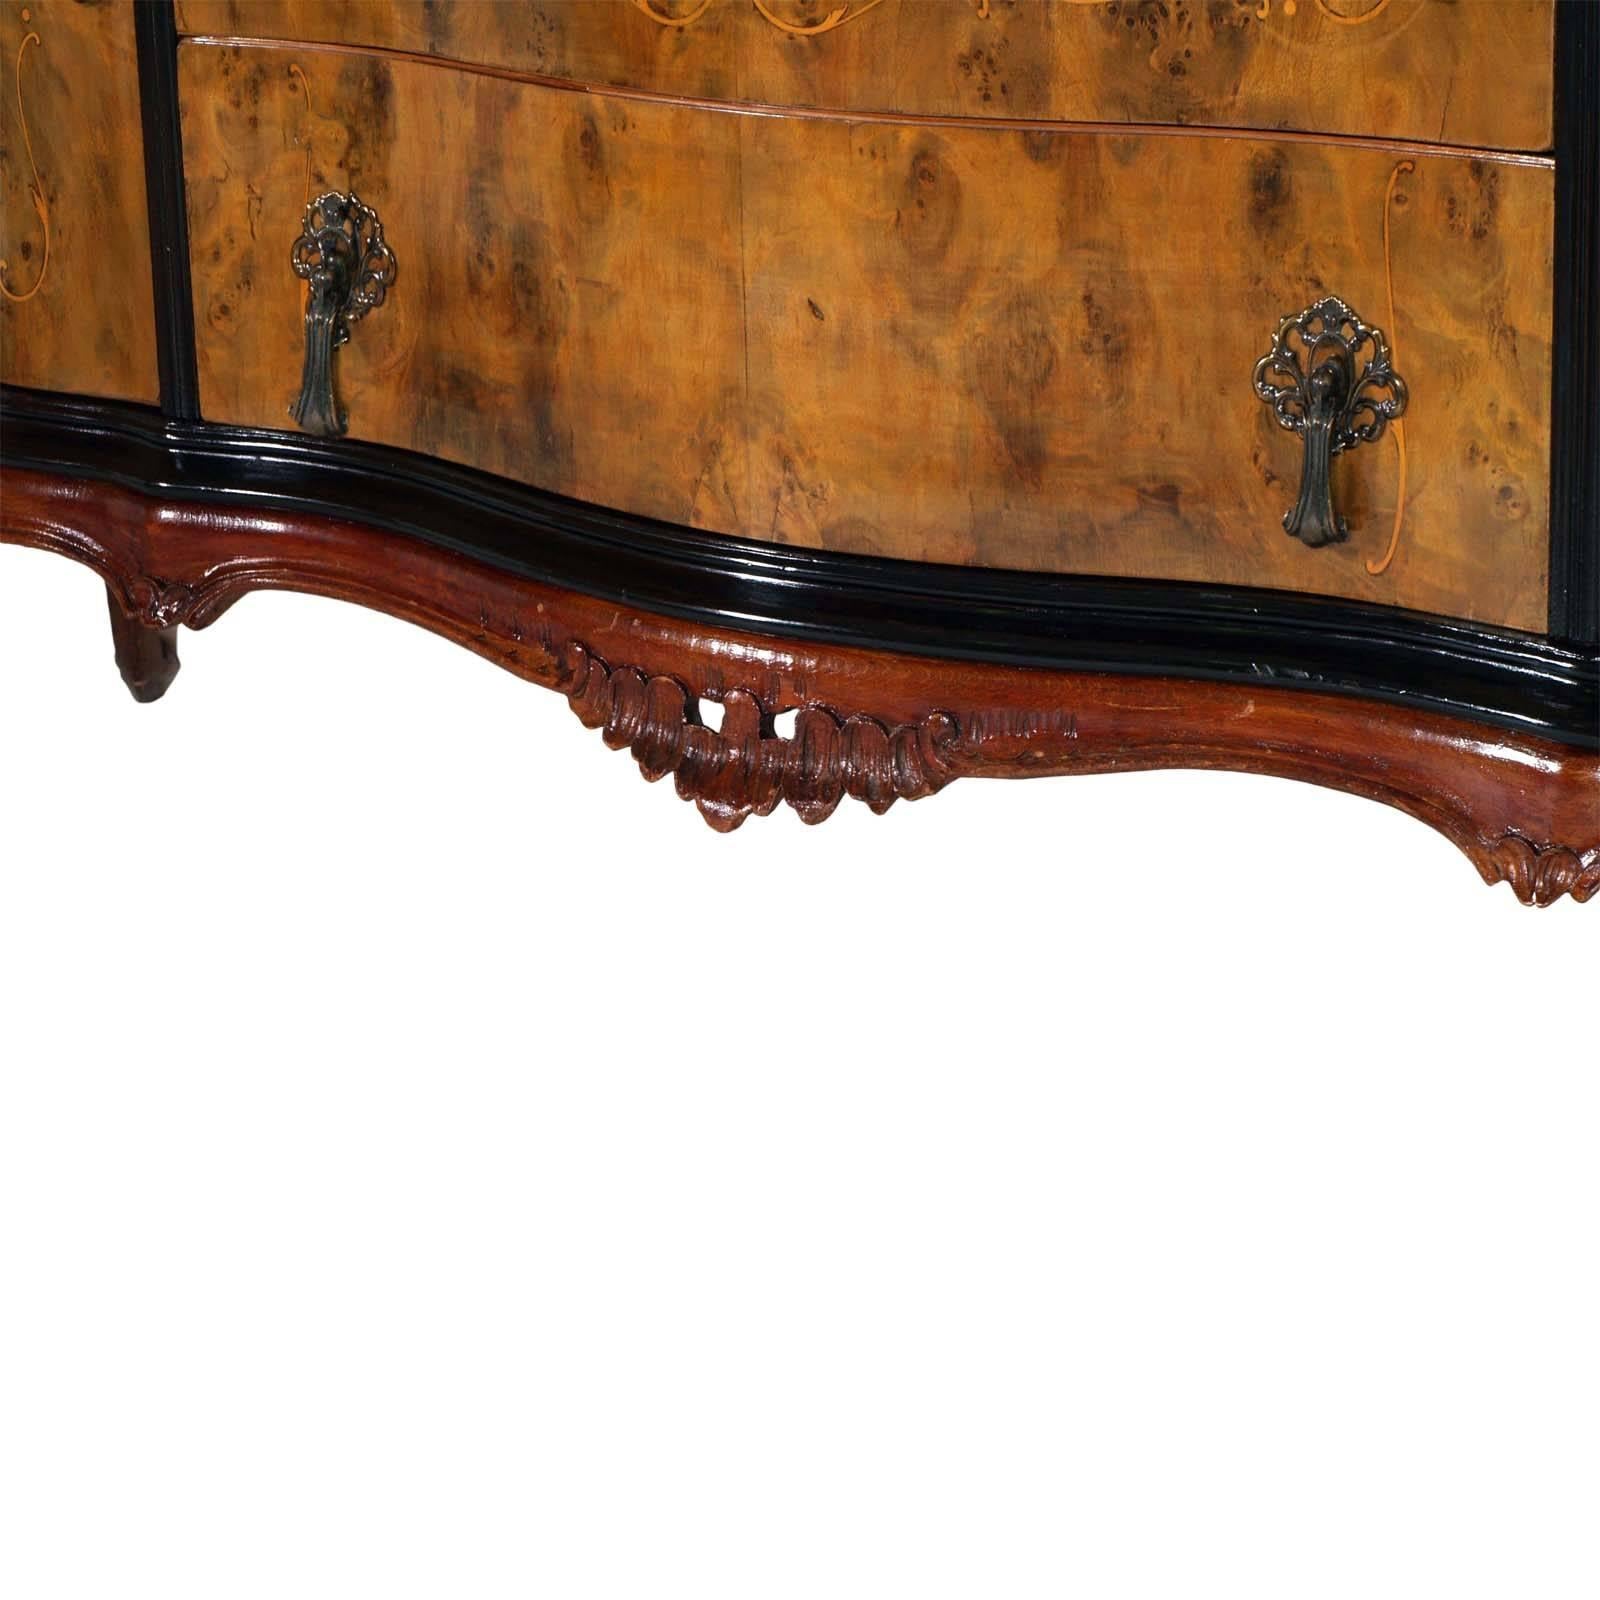 Baroque Revival Venetian Baroque High Quality Credenza with Mirror Gold Leaf , Burl Walnut For Sale